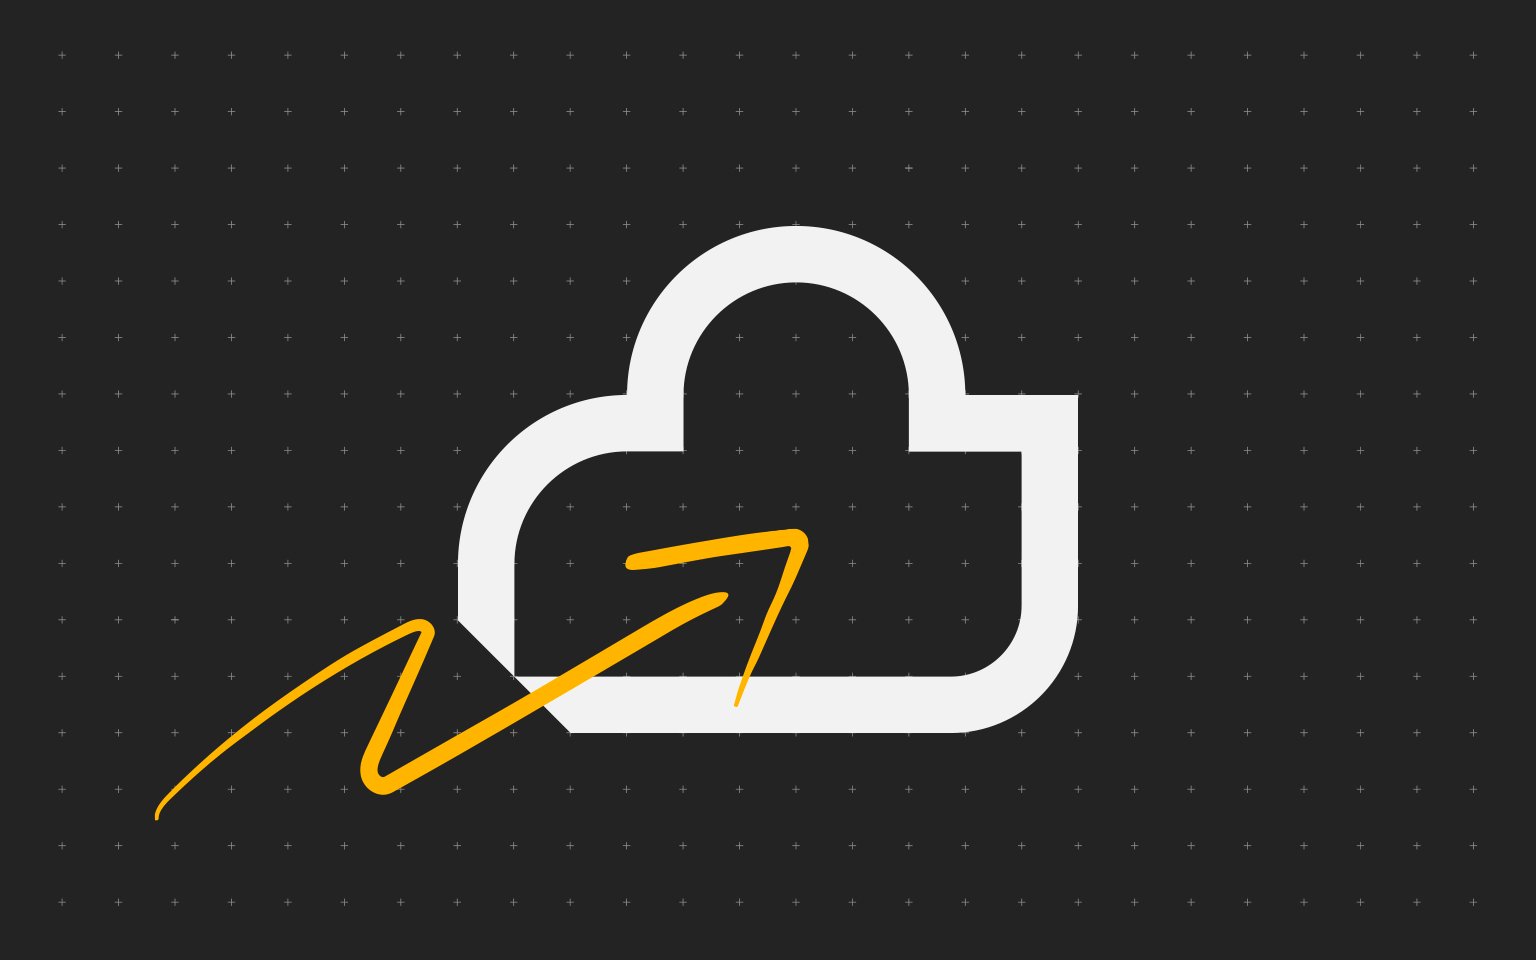 cloud connect icon